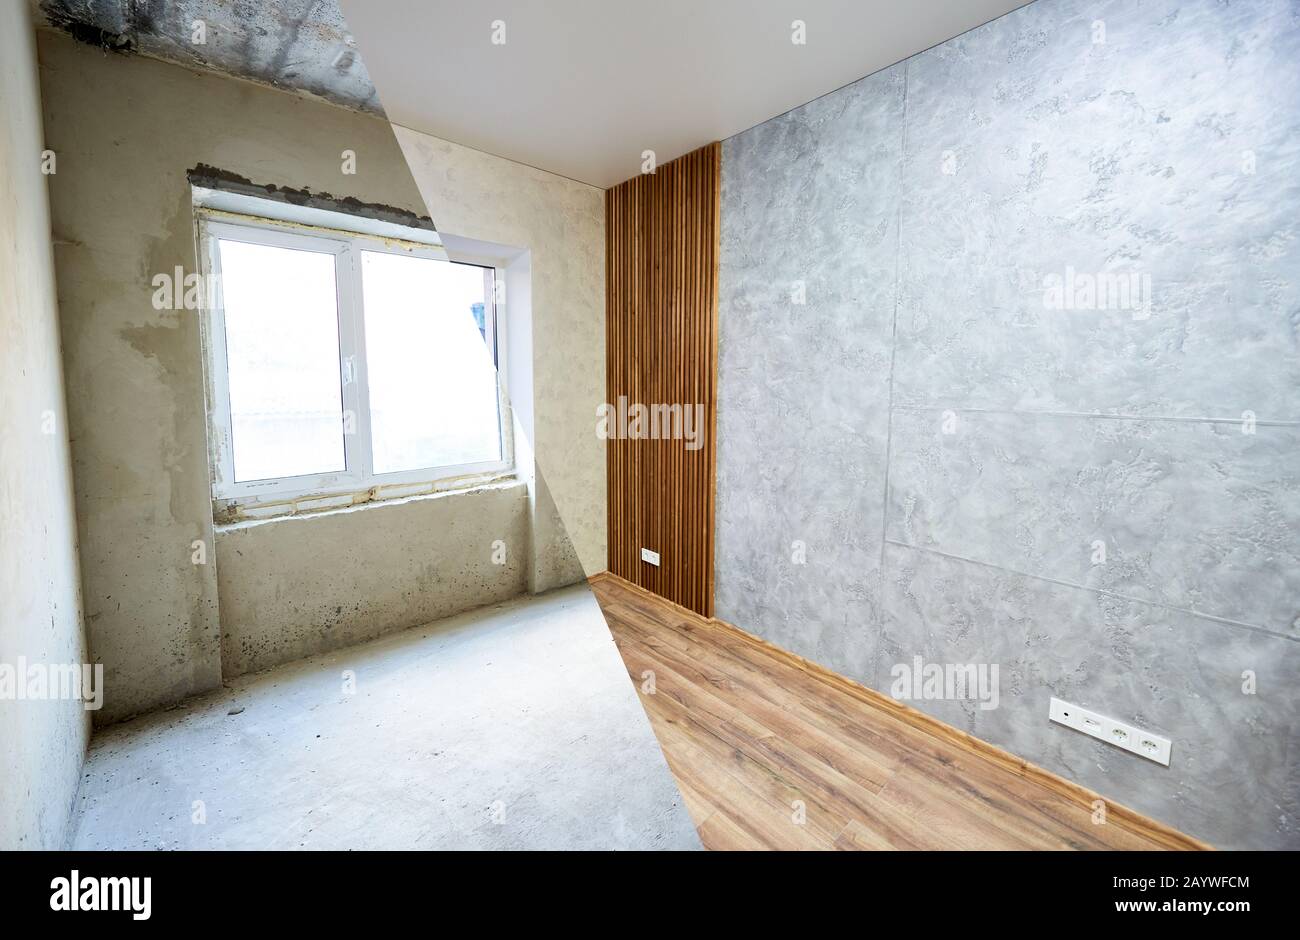 Kitchen before and after renovation works, new window before the final works, wooden texture on the wall and floor, grey wallpaper Stock Photo